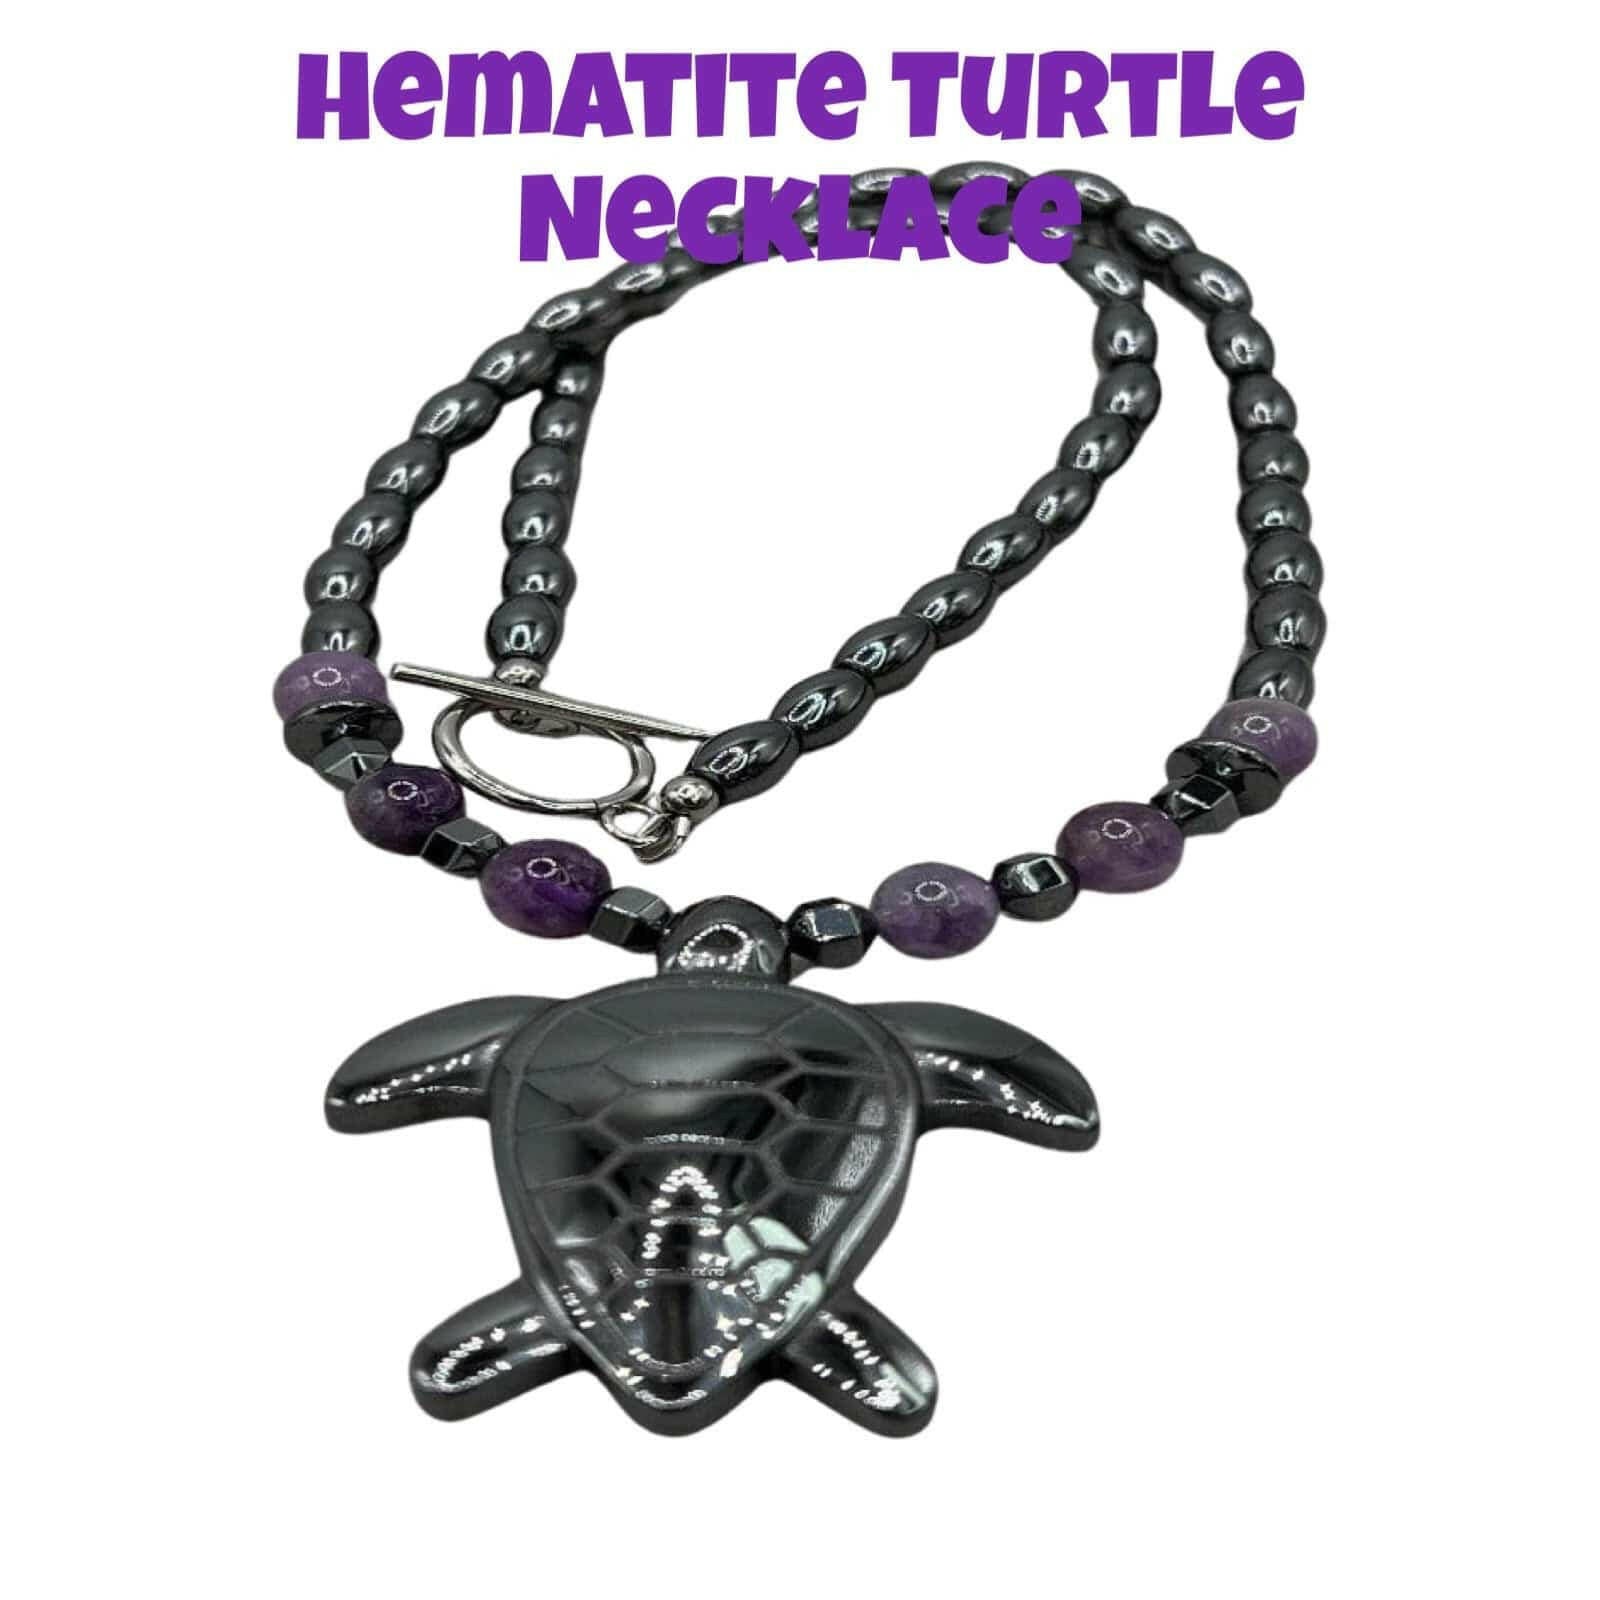 Bec Sue Jewelry Shop turtle necklace Amethyst Turtle Necklace, Sea Turtle Necklace, Turtle Jewelry, Hematite Necklace Tags